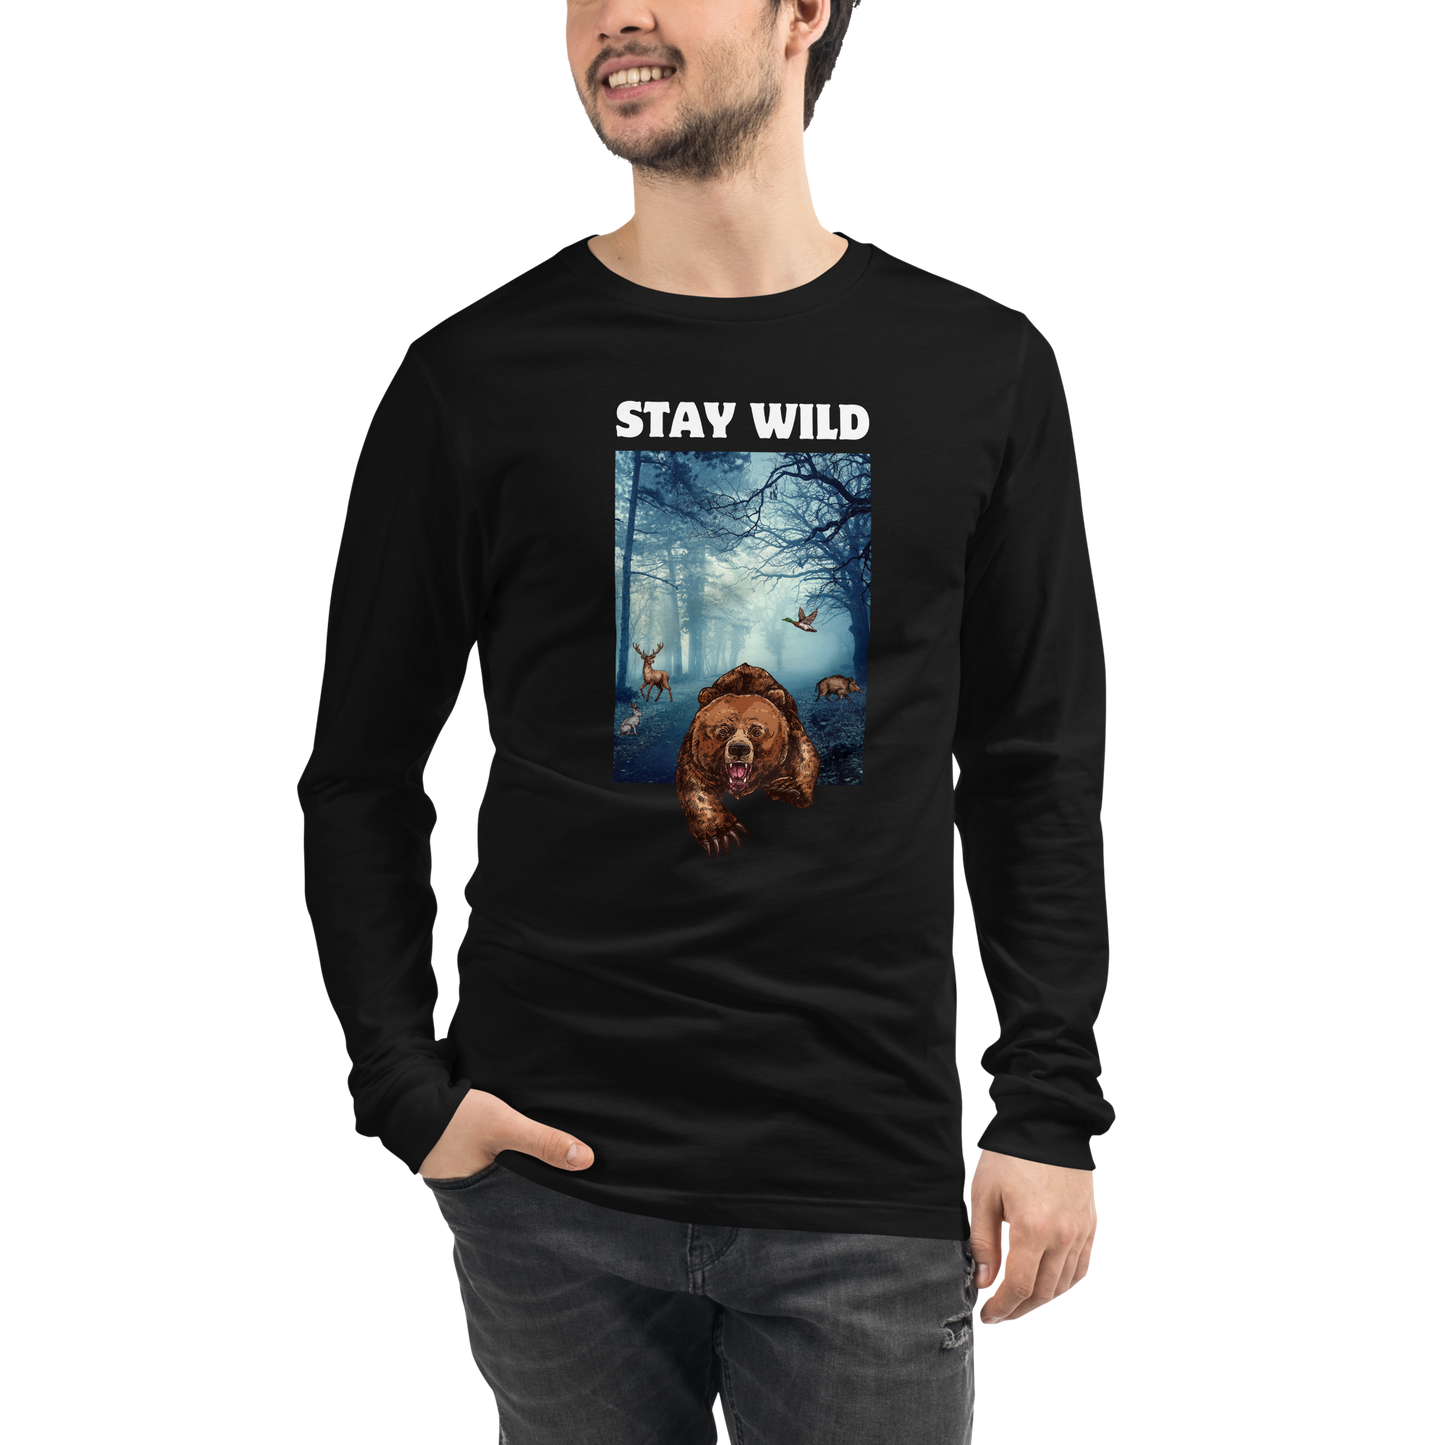 Man wearing a Black Bear Long Sleeve Tee featuring a Stay Wild graphic on the chest - Cool Bear Long Sleeve Graphic Tees - Boozy Fox